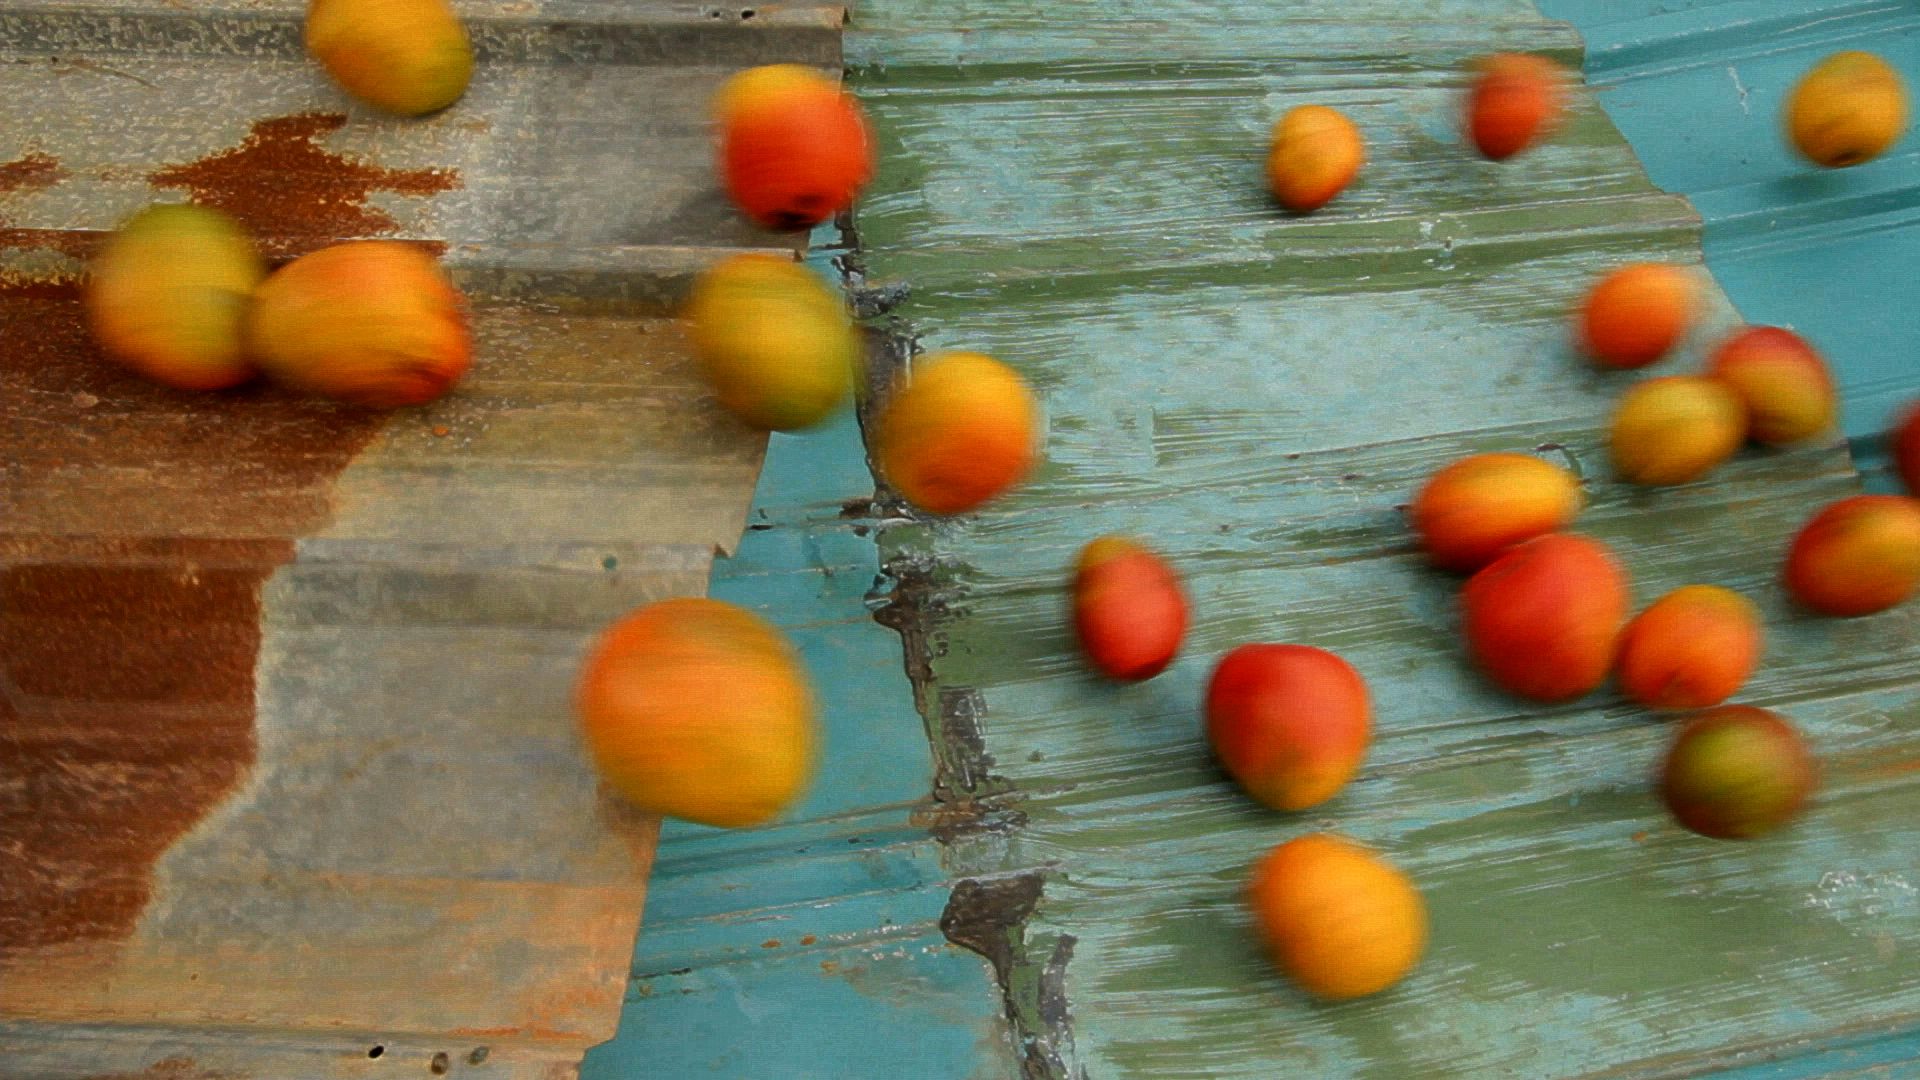 mangos rolling on multi colored metal, a still image as part of the formation form exhibit